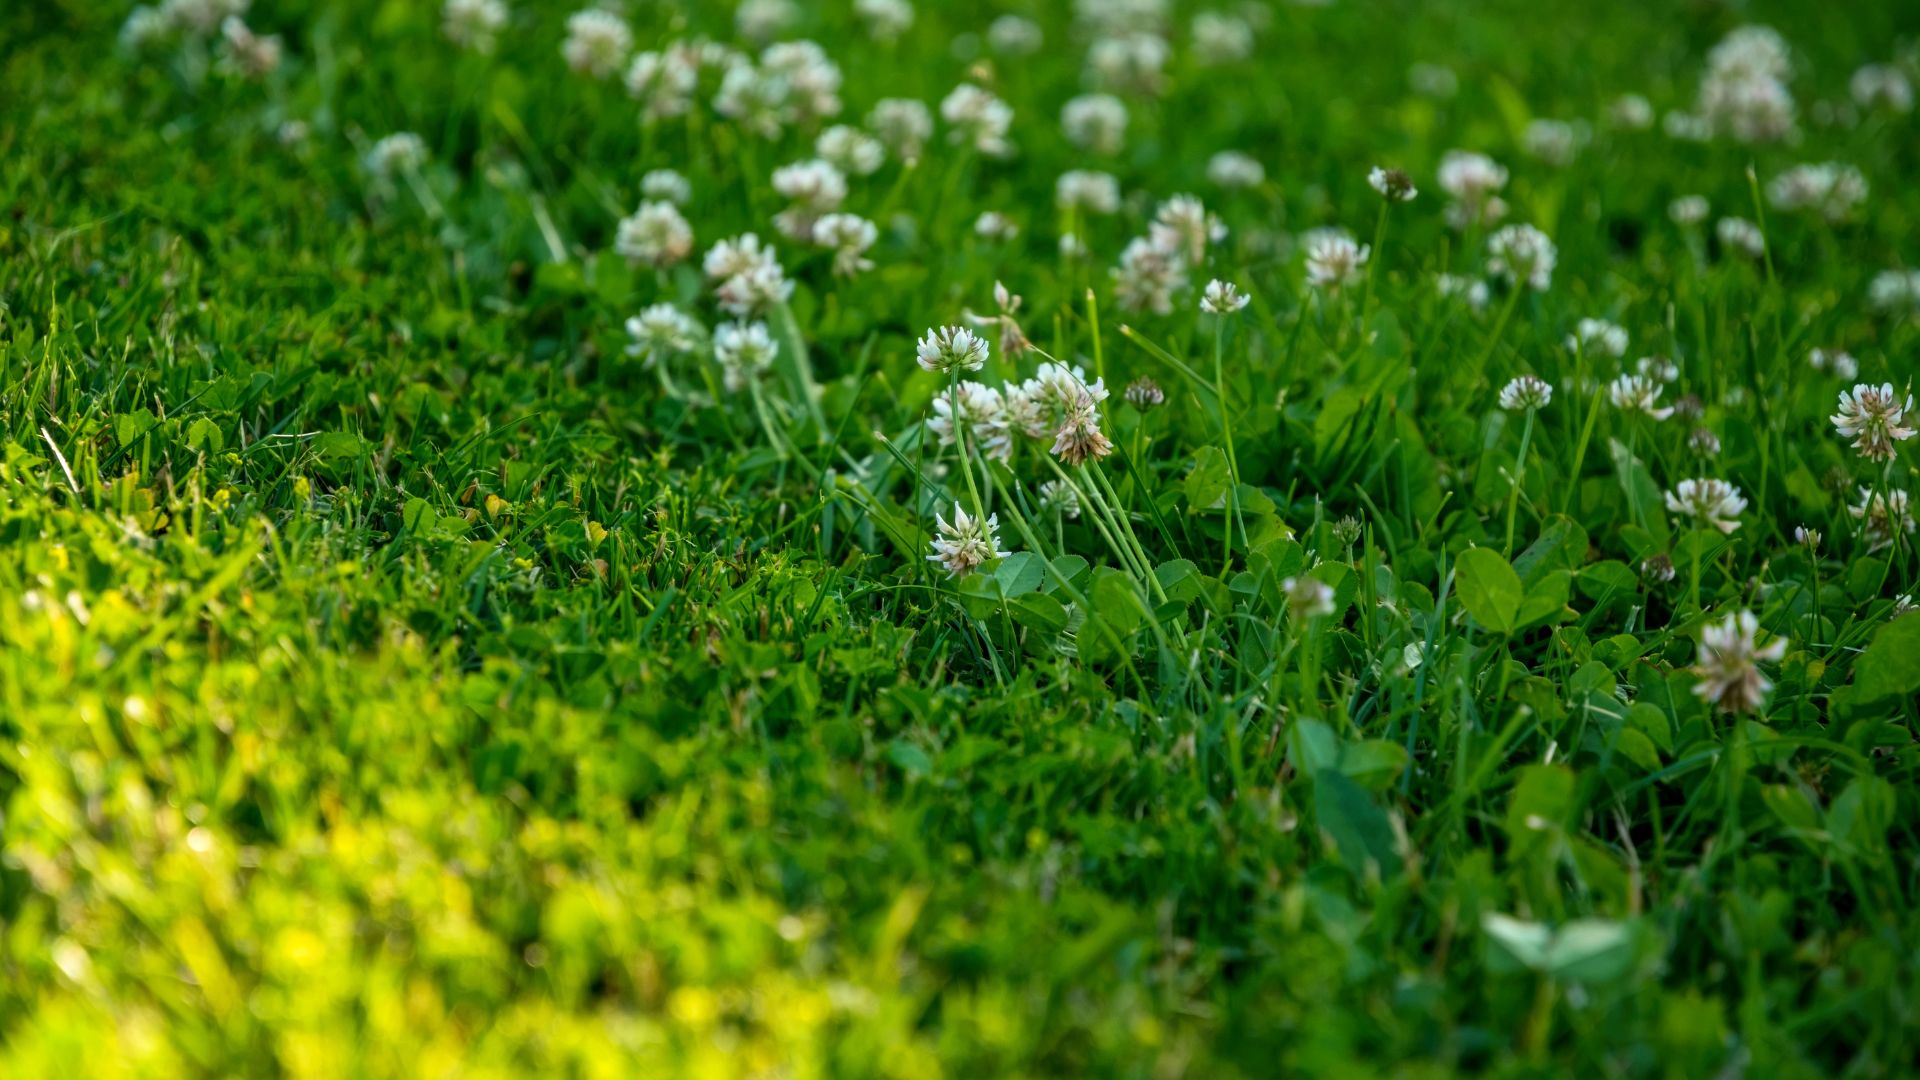 Royal City Nursery-Guelph-ontario-Everything You Need to Know About Lawn Alternatives-clover lawn